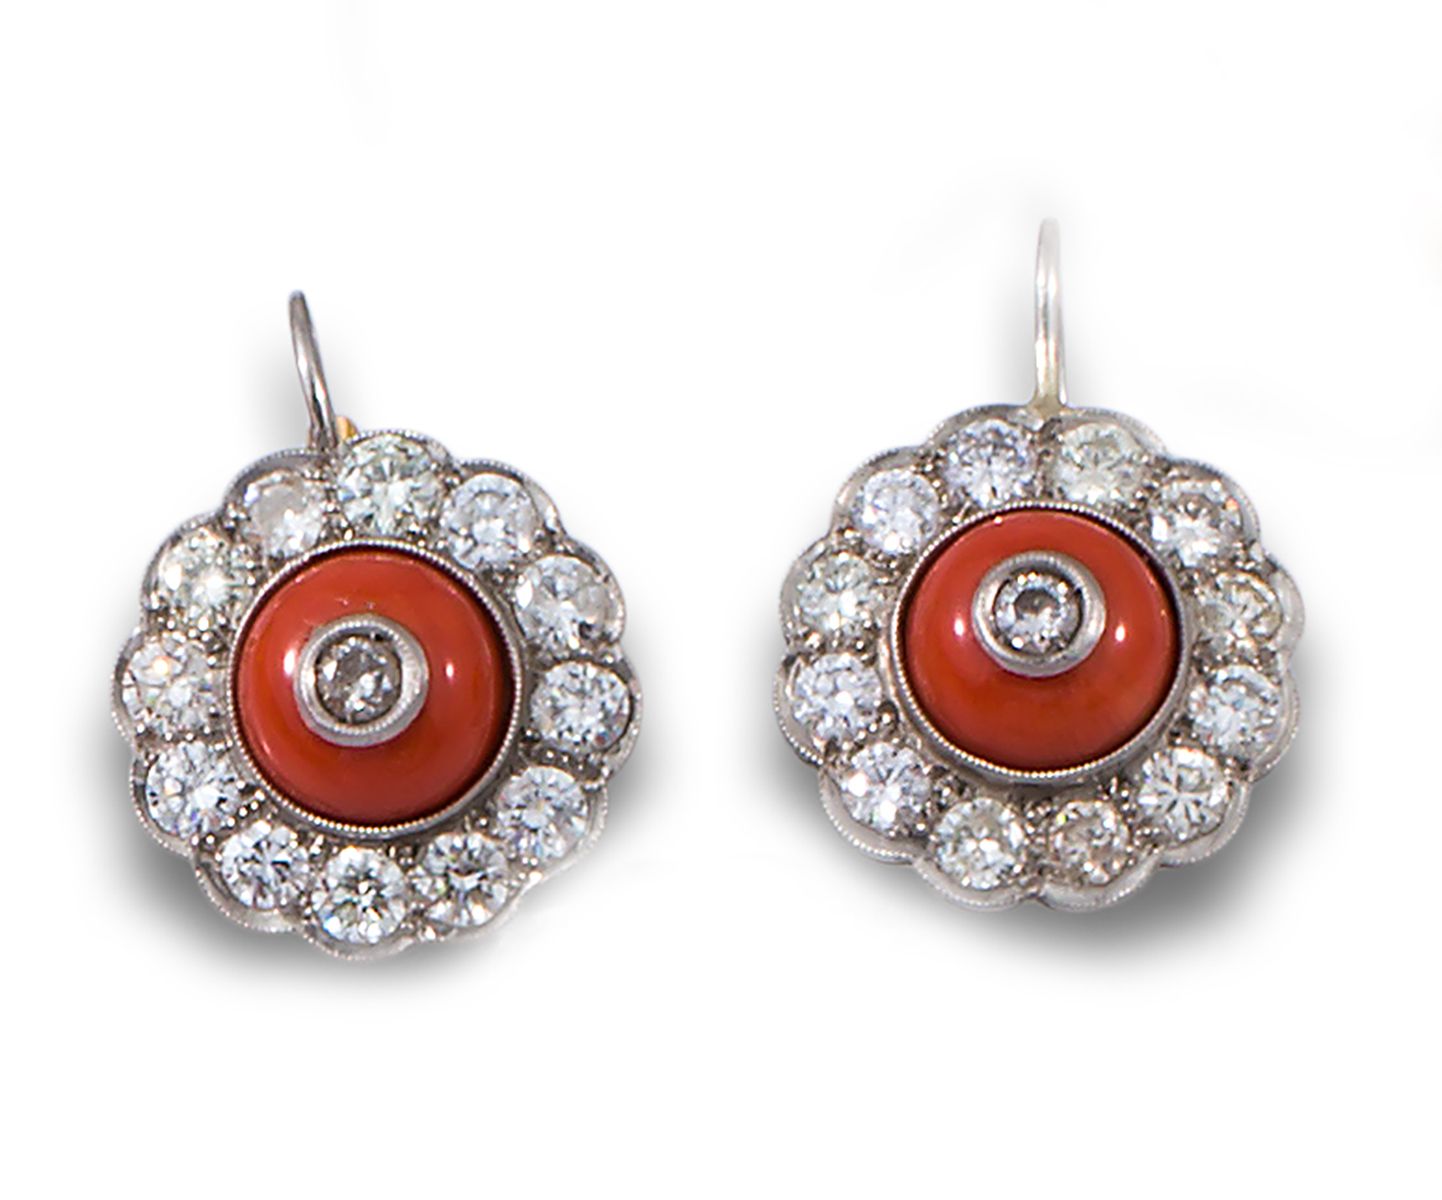 EARRINGS, ANTIQUE STYLE, DIAMOND, CORAL, PLATINUM Dangling earrings, antique sty&hellip;